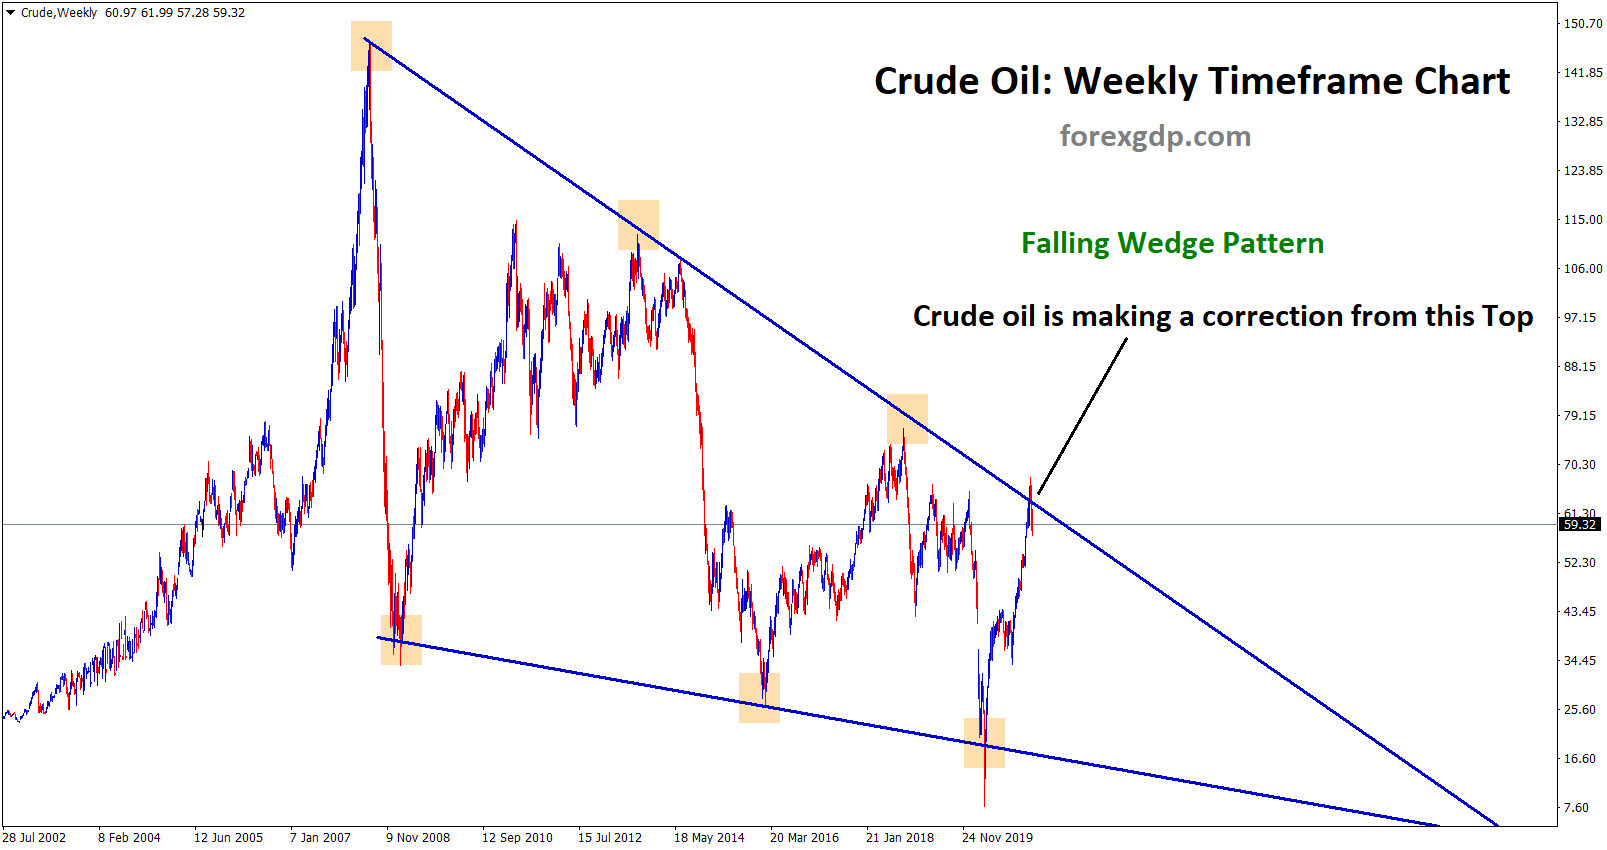 crude oil price correction in the technical chart pattern falling wedge